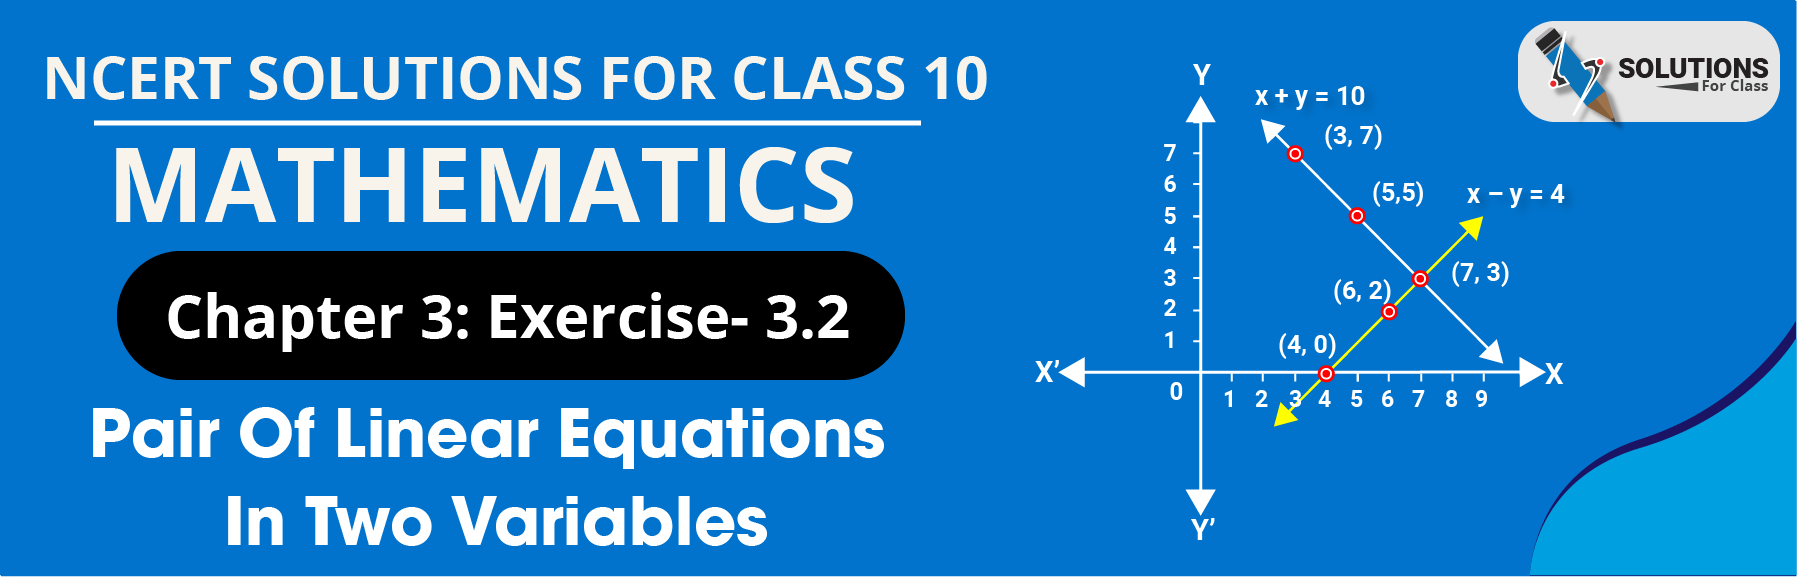 NCERT Solution For Class 10, Maths, Pair Of Linear Equations In Two Variables, Exercise 3.2